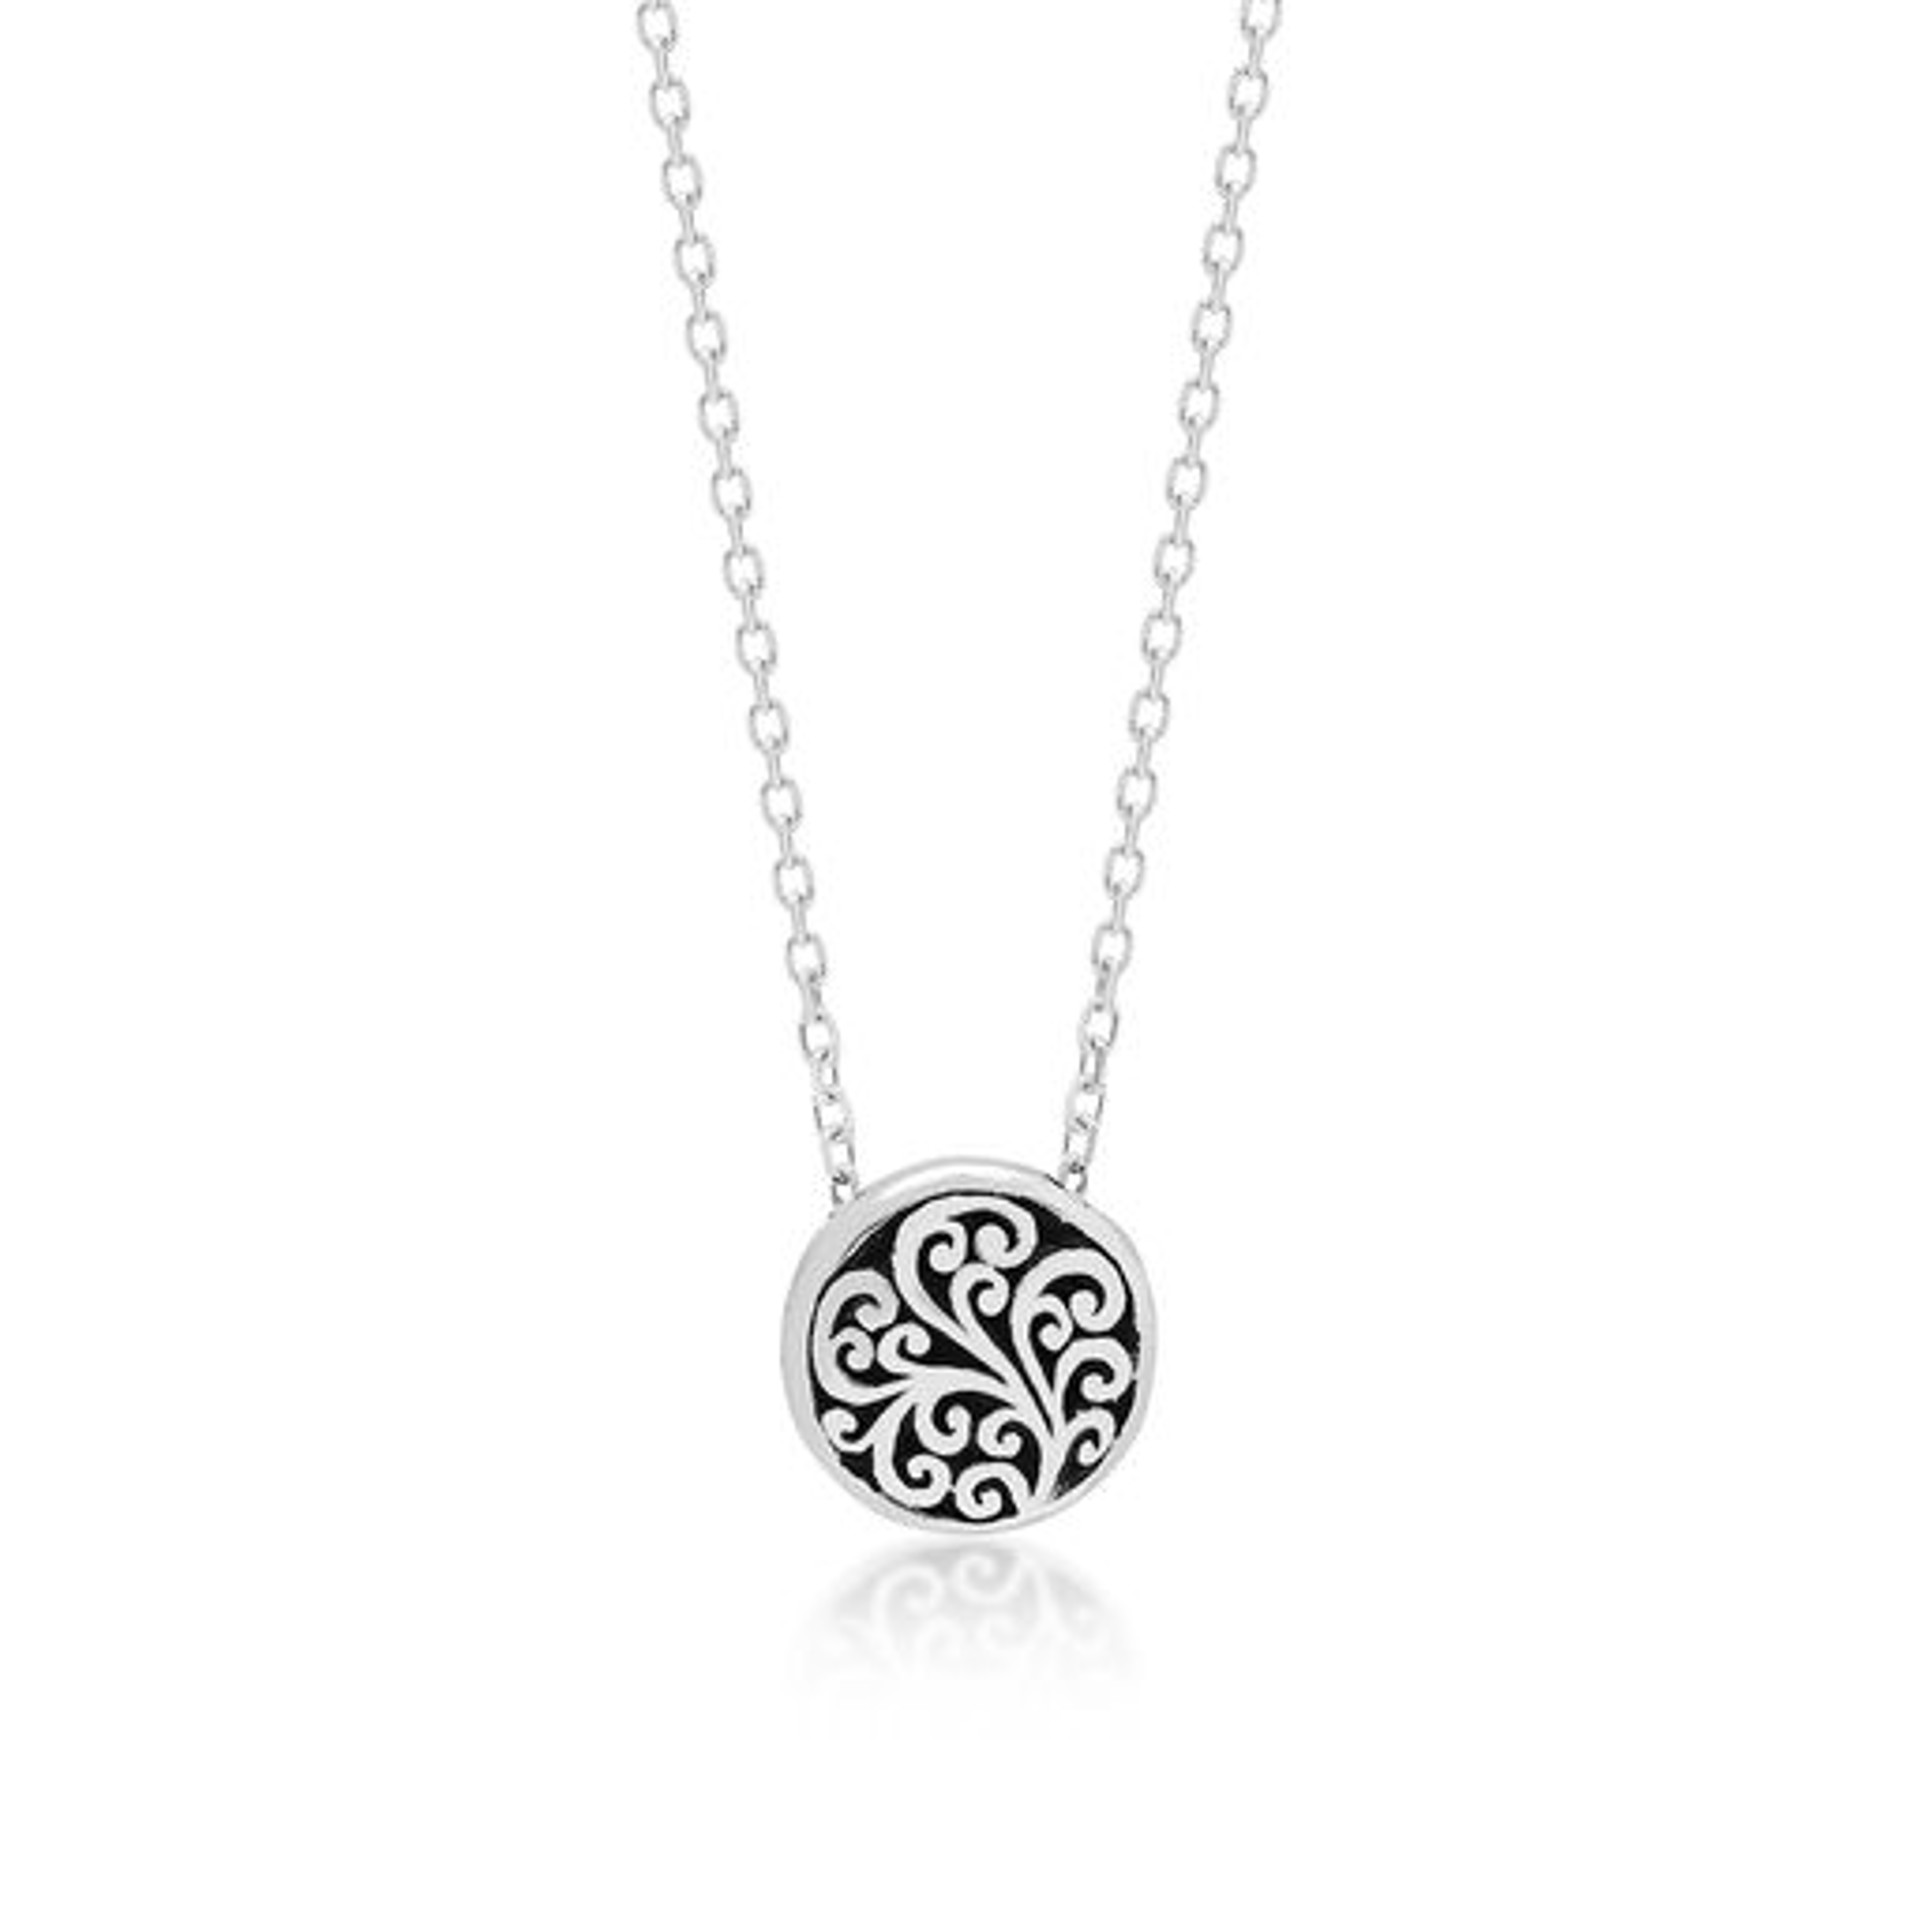 LH Signature Scroll Sterling Silver Delicate Round Pendant Necklace in Adjustable Chain by Lois Hill